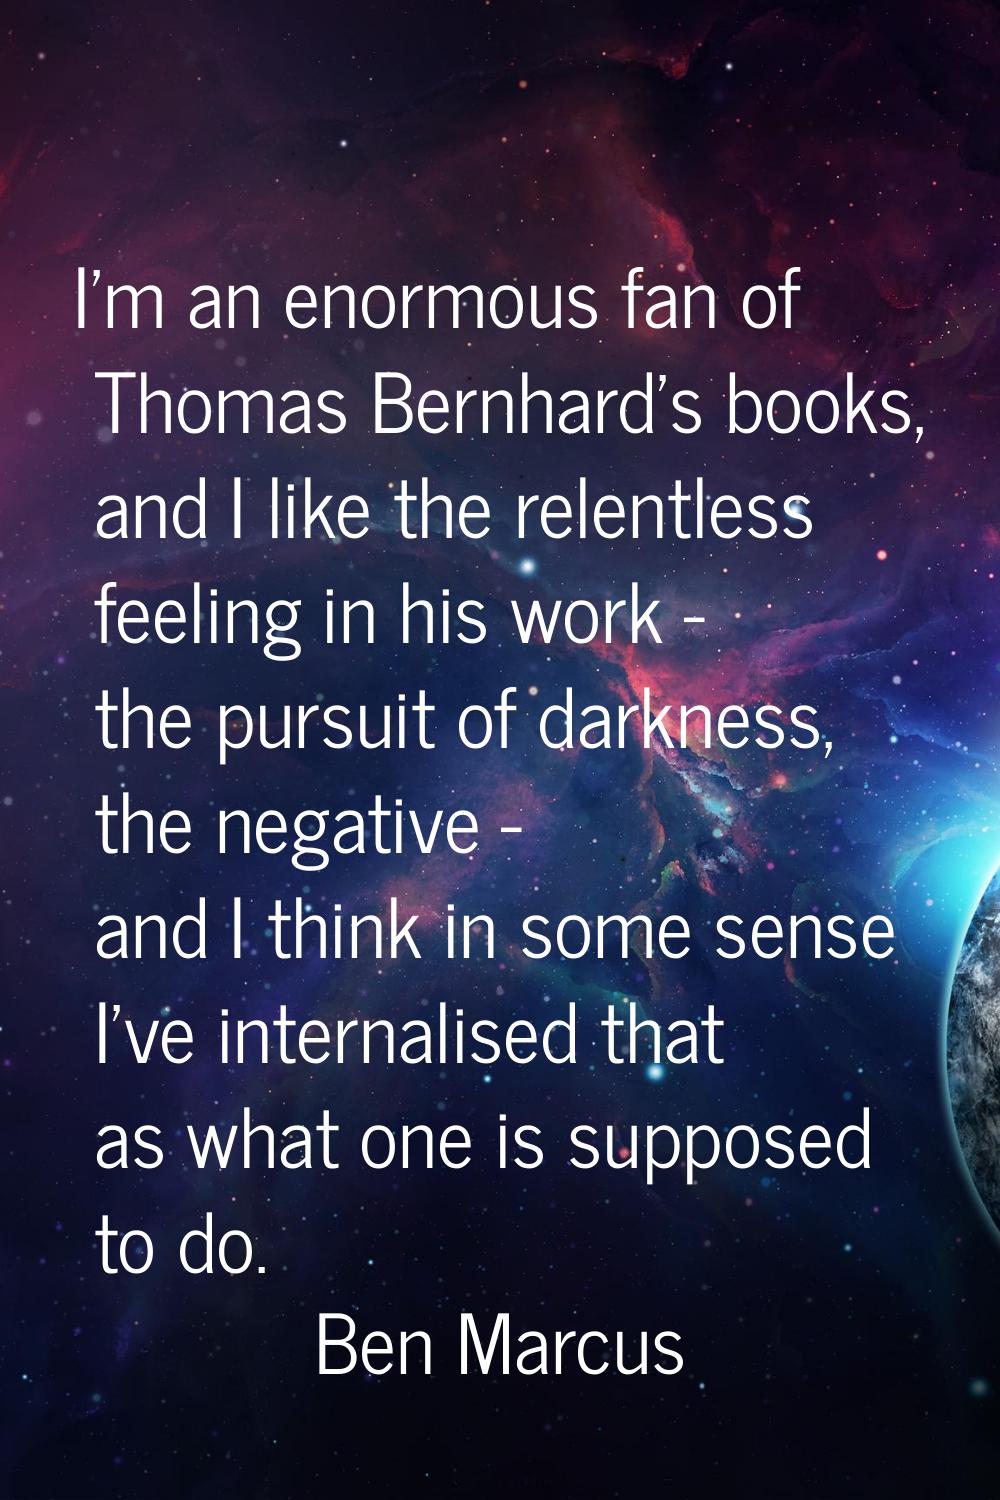 I'm an enormous fan of Thomas Bernhard's books, and I like the relentless feeling in his work - the